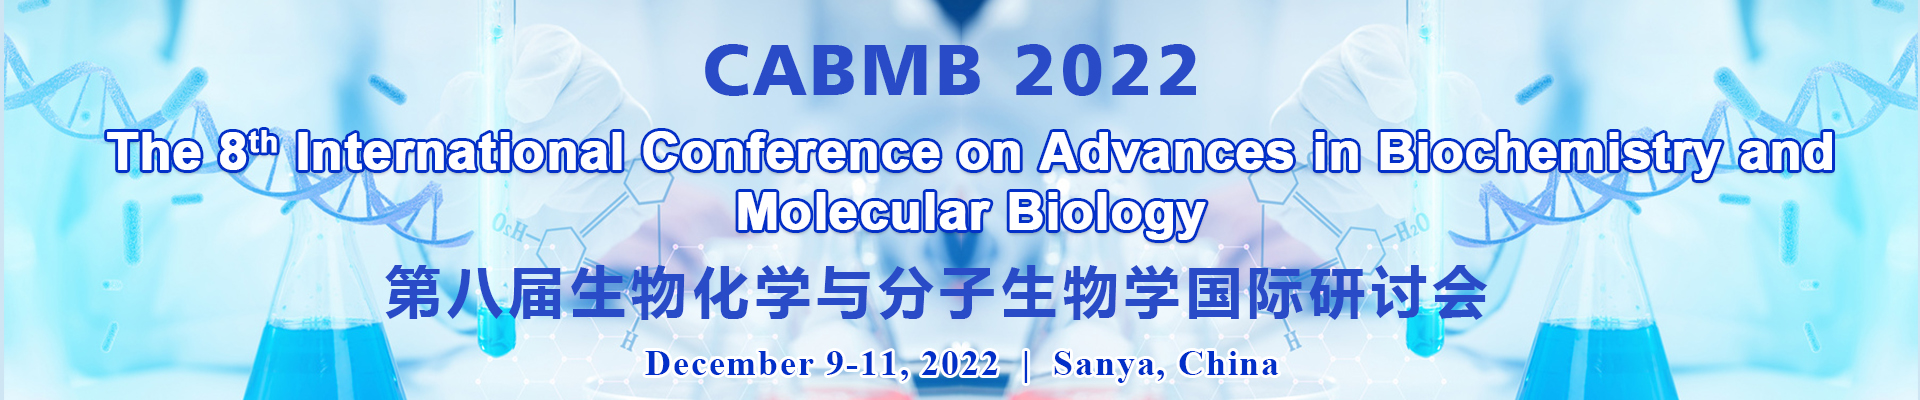 The 8th International Conference on Advances in Biochemistry and Molecular Biology (CABMB 2022), Online Event